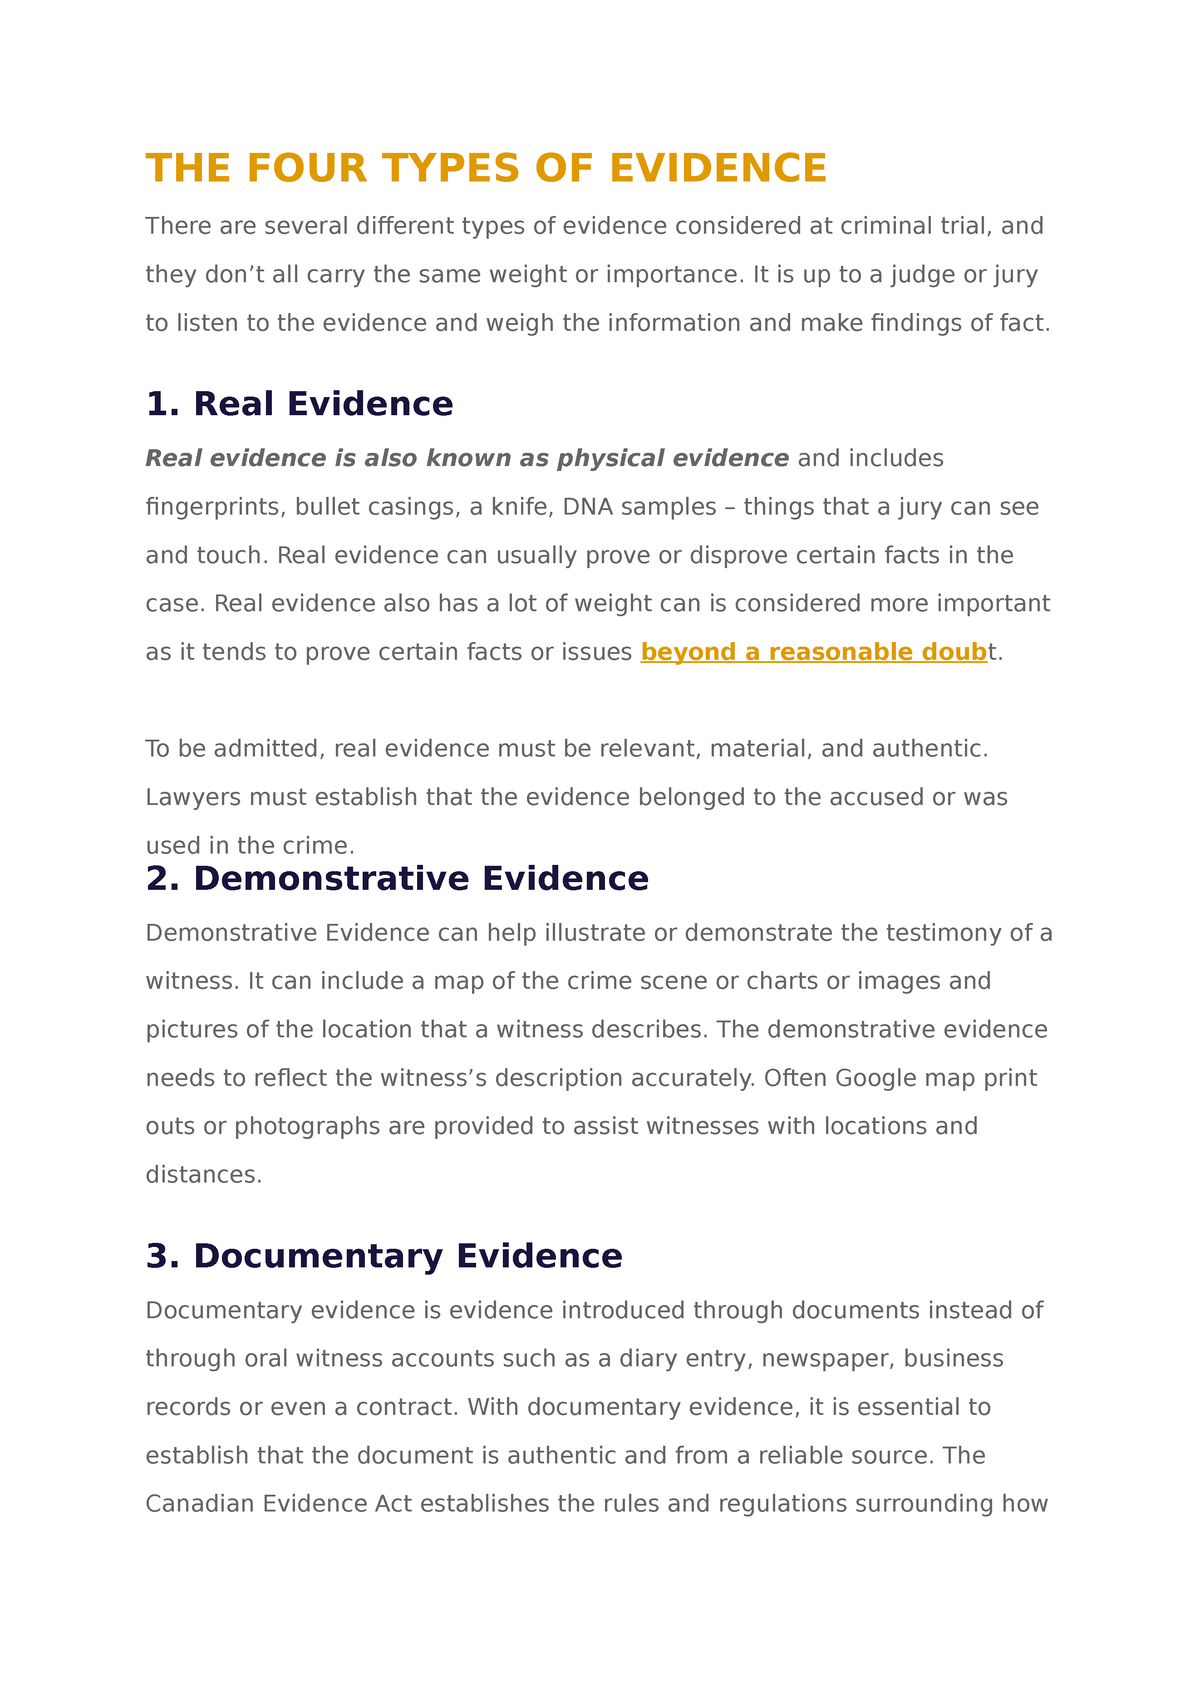 types of evidence assignment